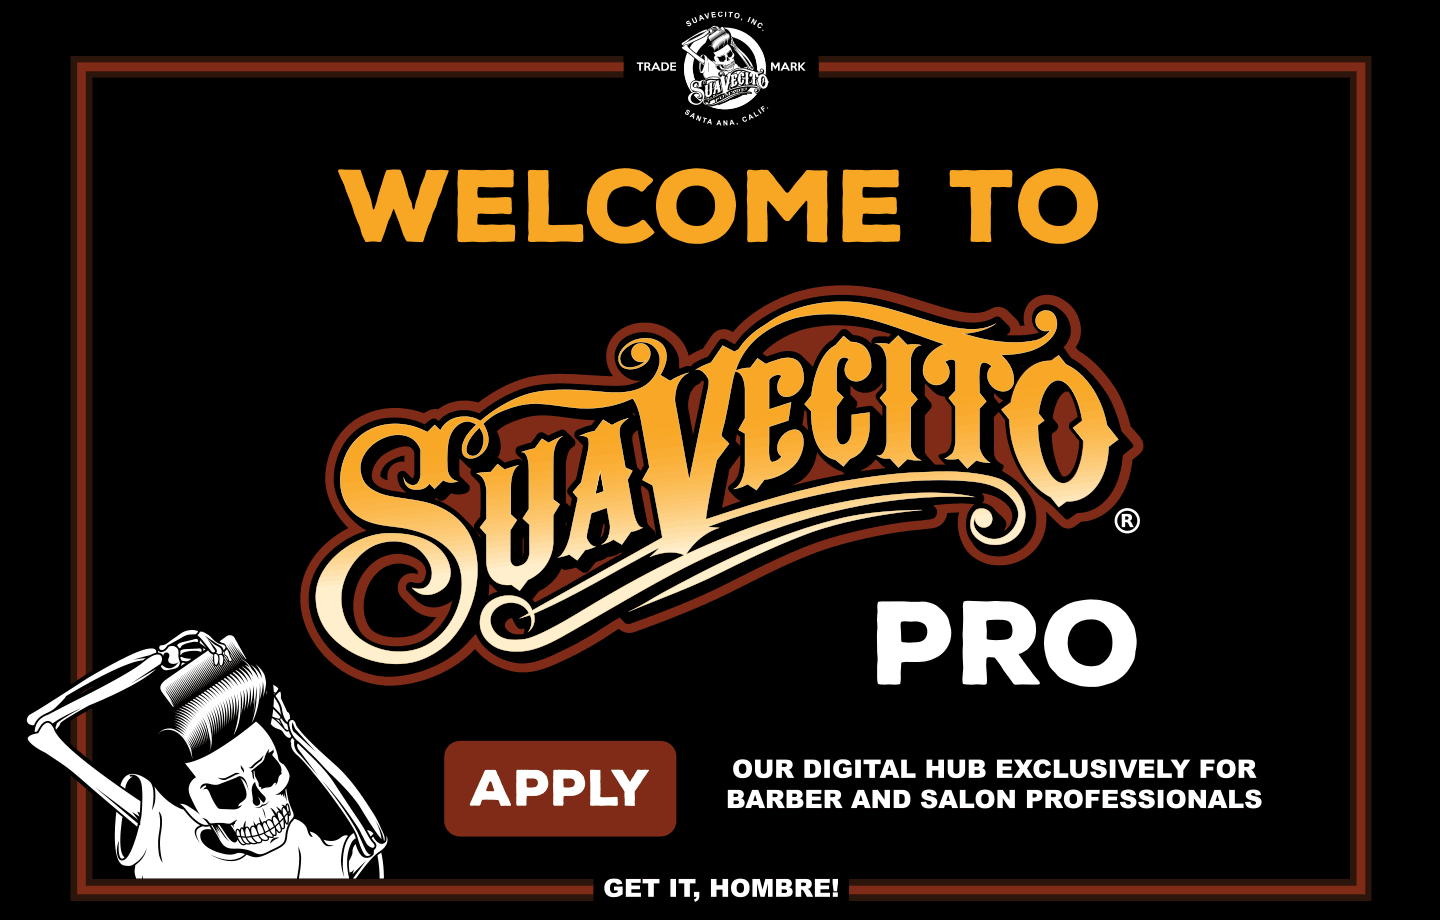 Welcome to Suavecito for Professionals. Click to apply.